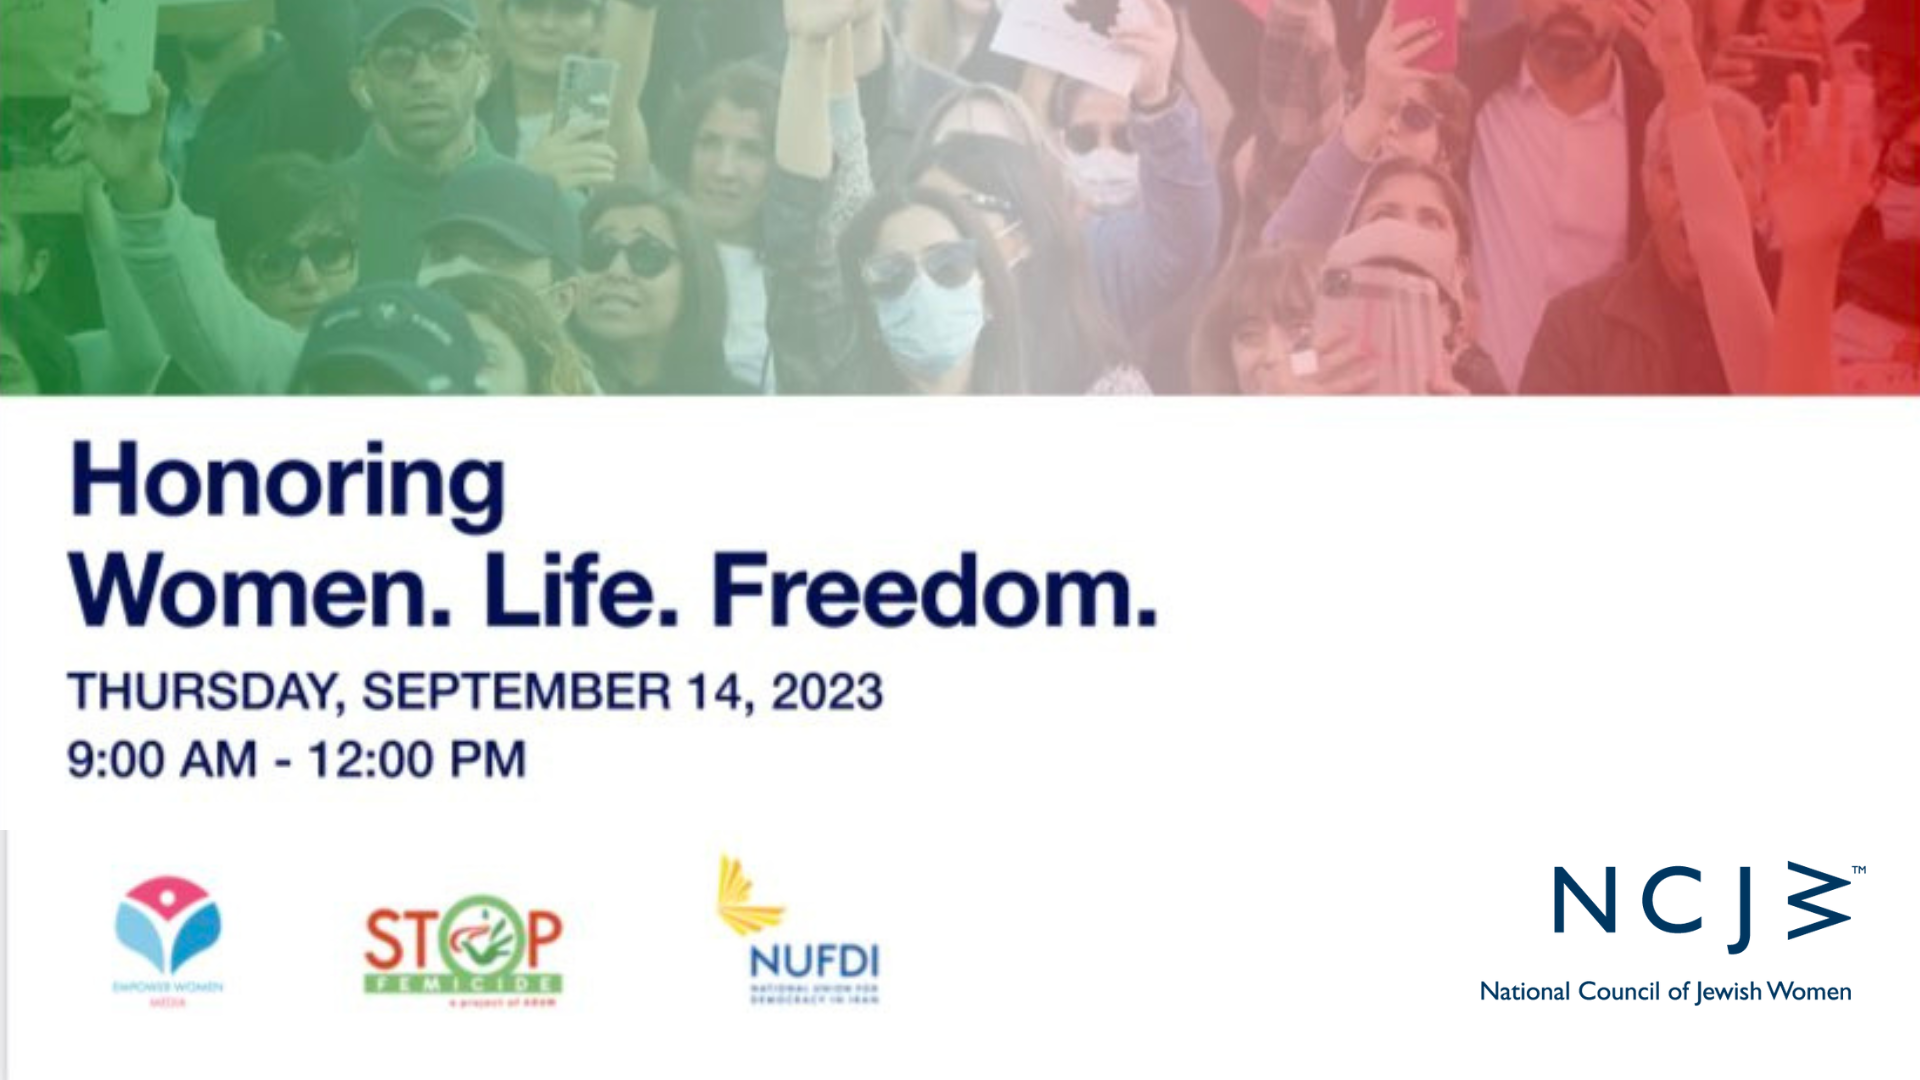 National Council Of Jewish Women Honoring Women Life Freedom Event In Solidarity With